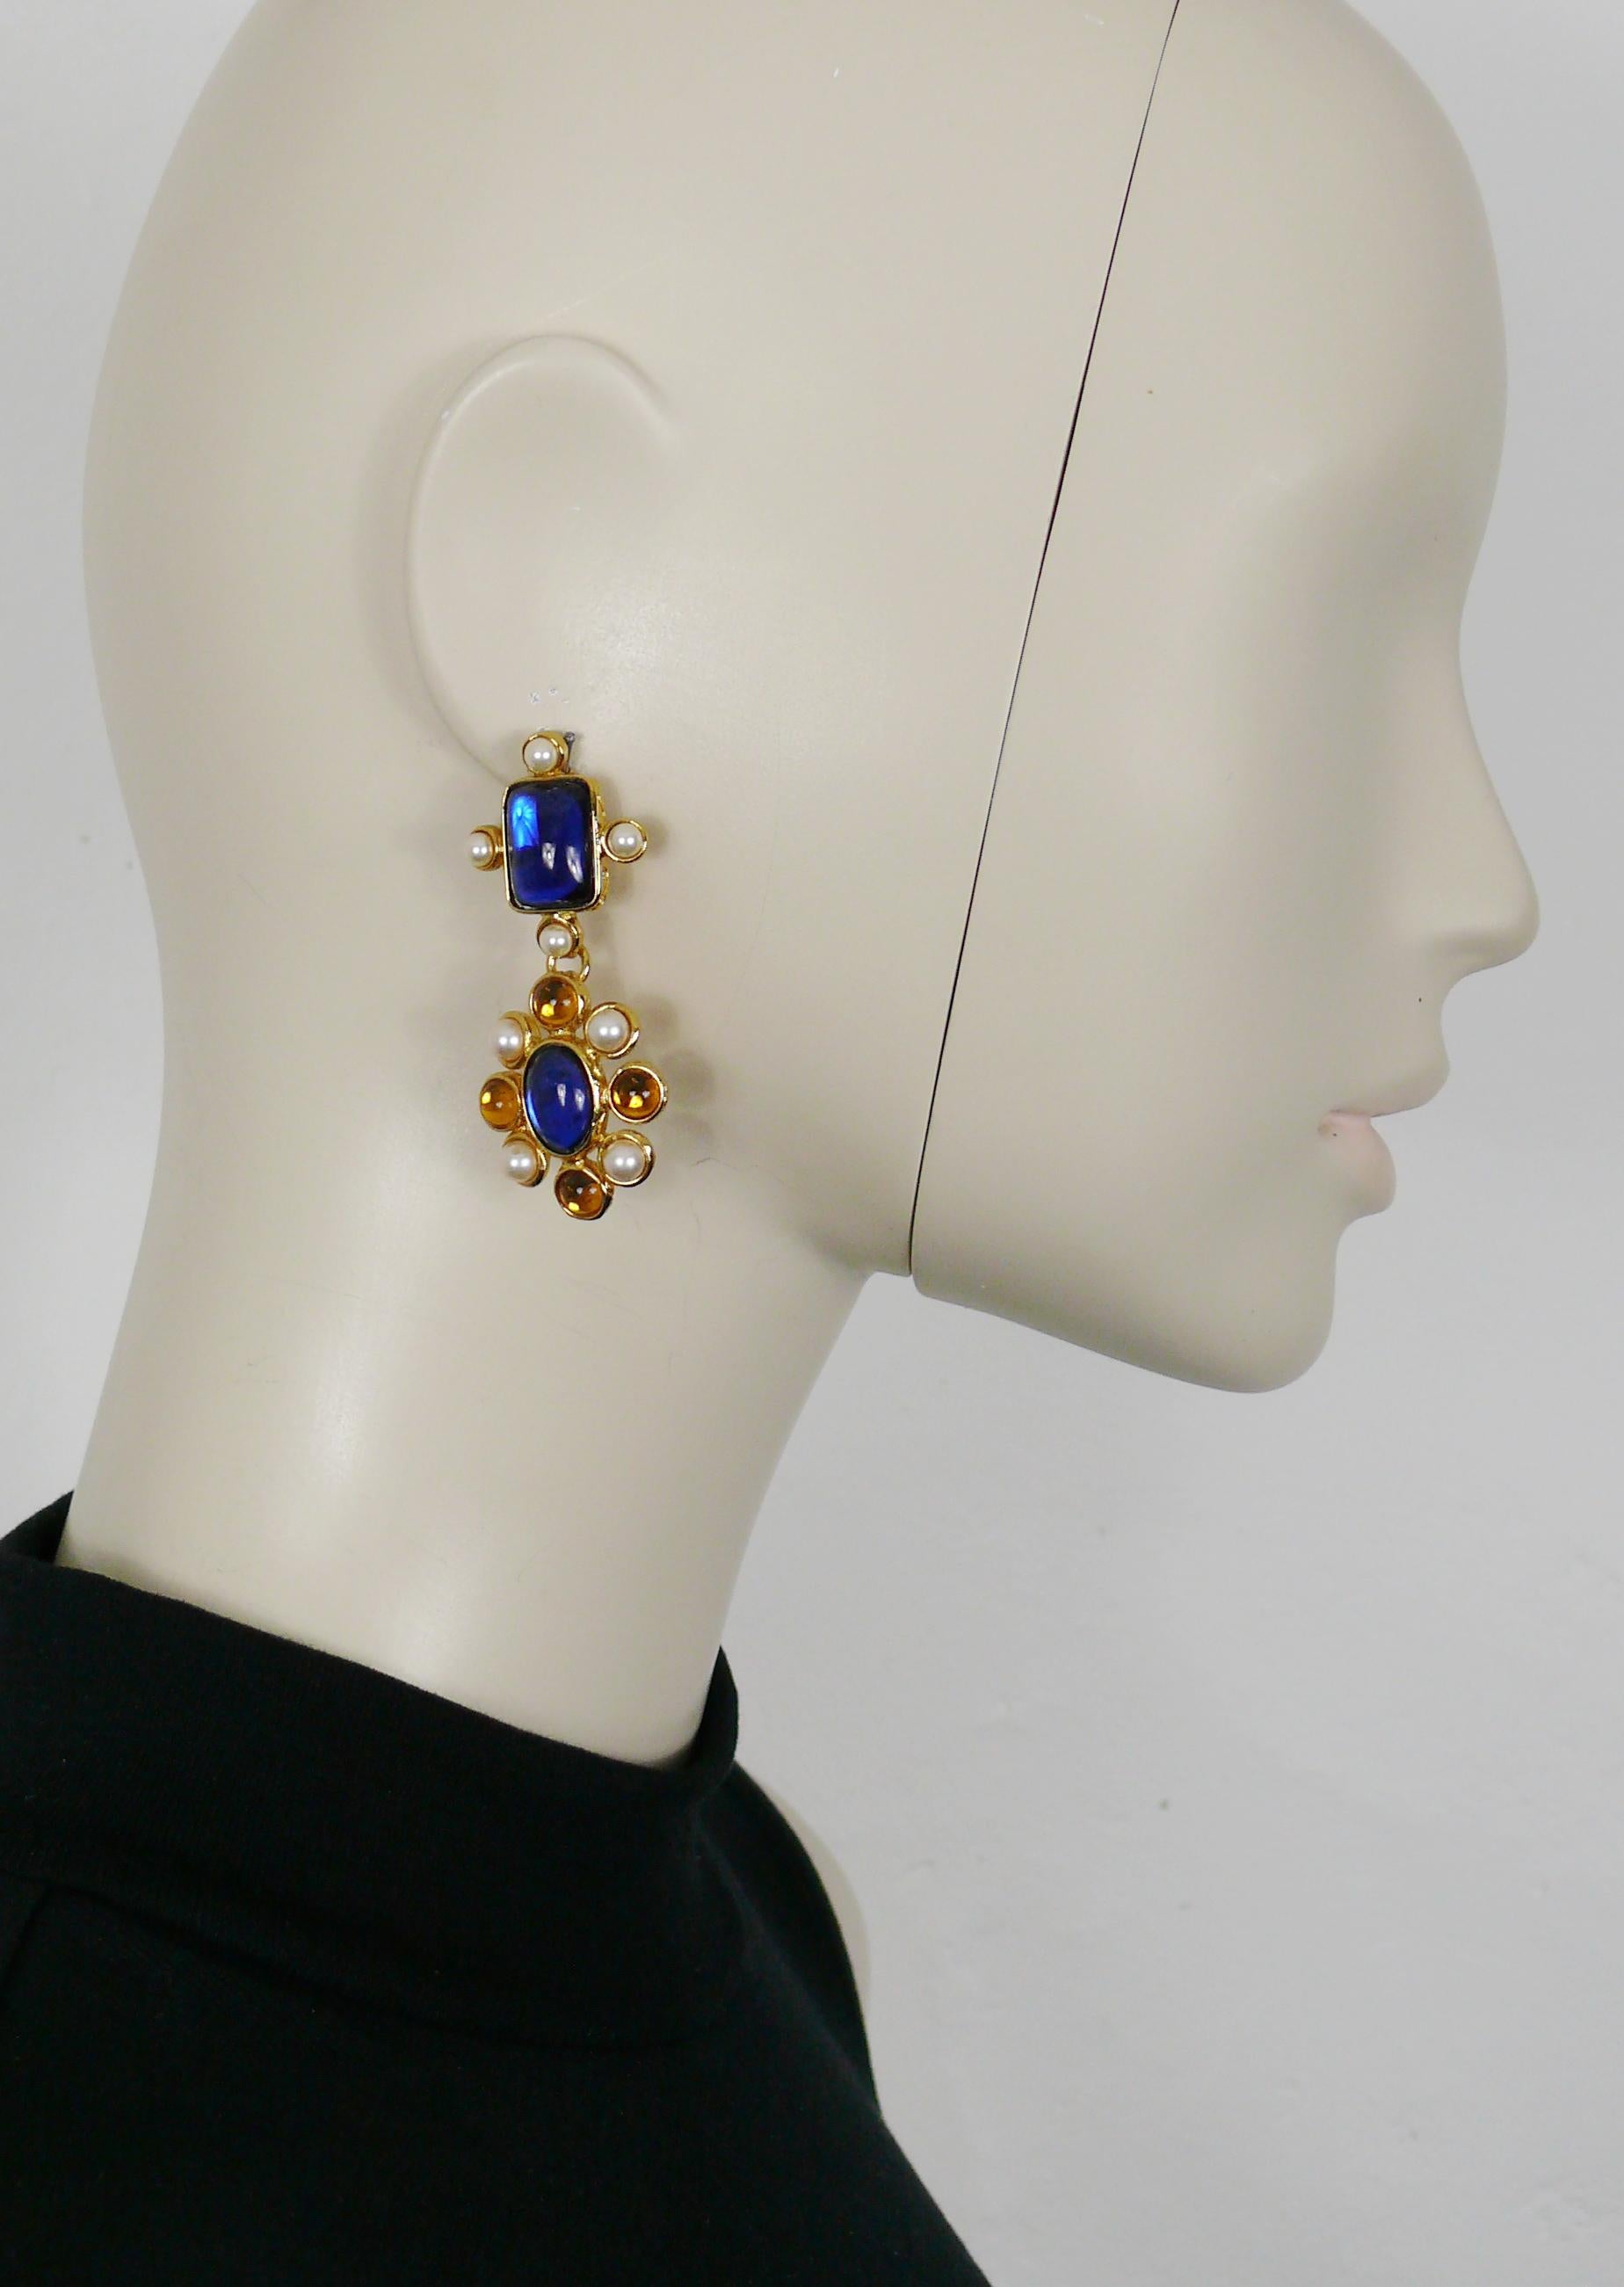 YVES SAINT LAURENT vintage gold toned dangling earrings (clip-on) featuring a stylized flower pendant embellished with a blue oval resin cabochon, faux pearls and orange glass cabochons, topped by a blue resin cabochon cross adorned by faux